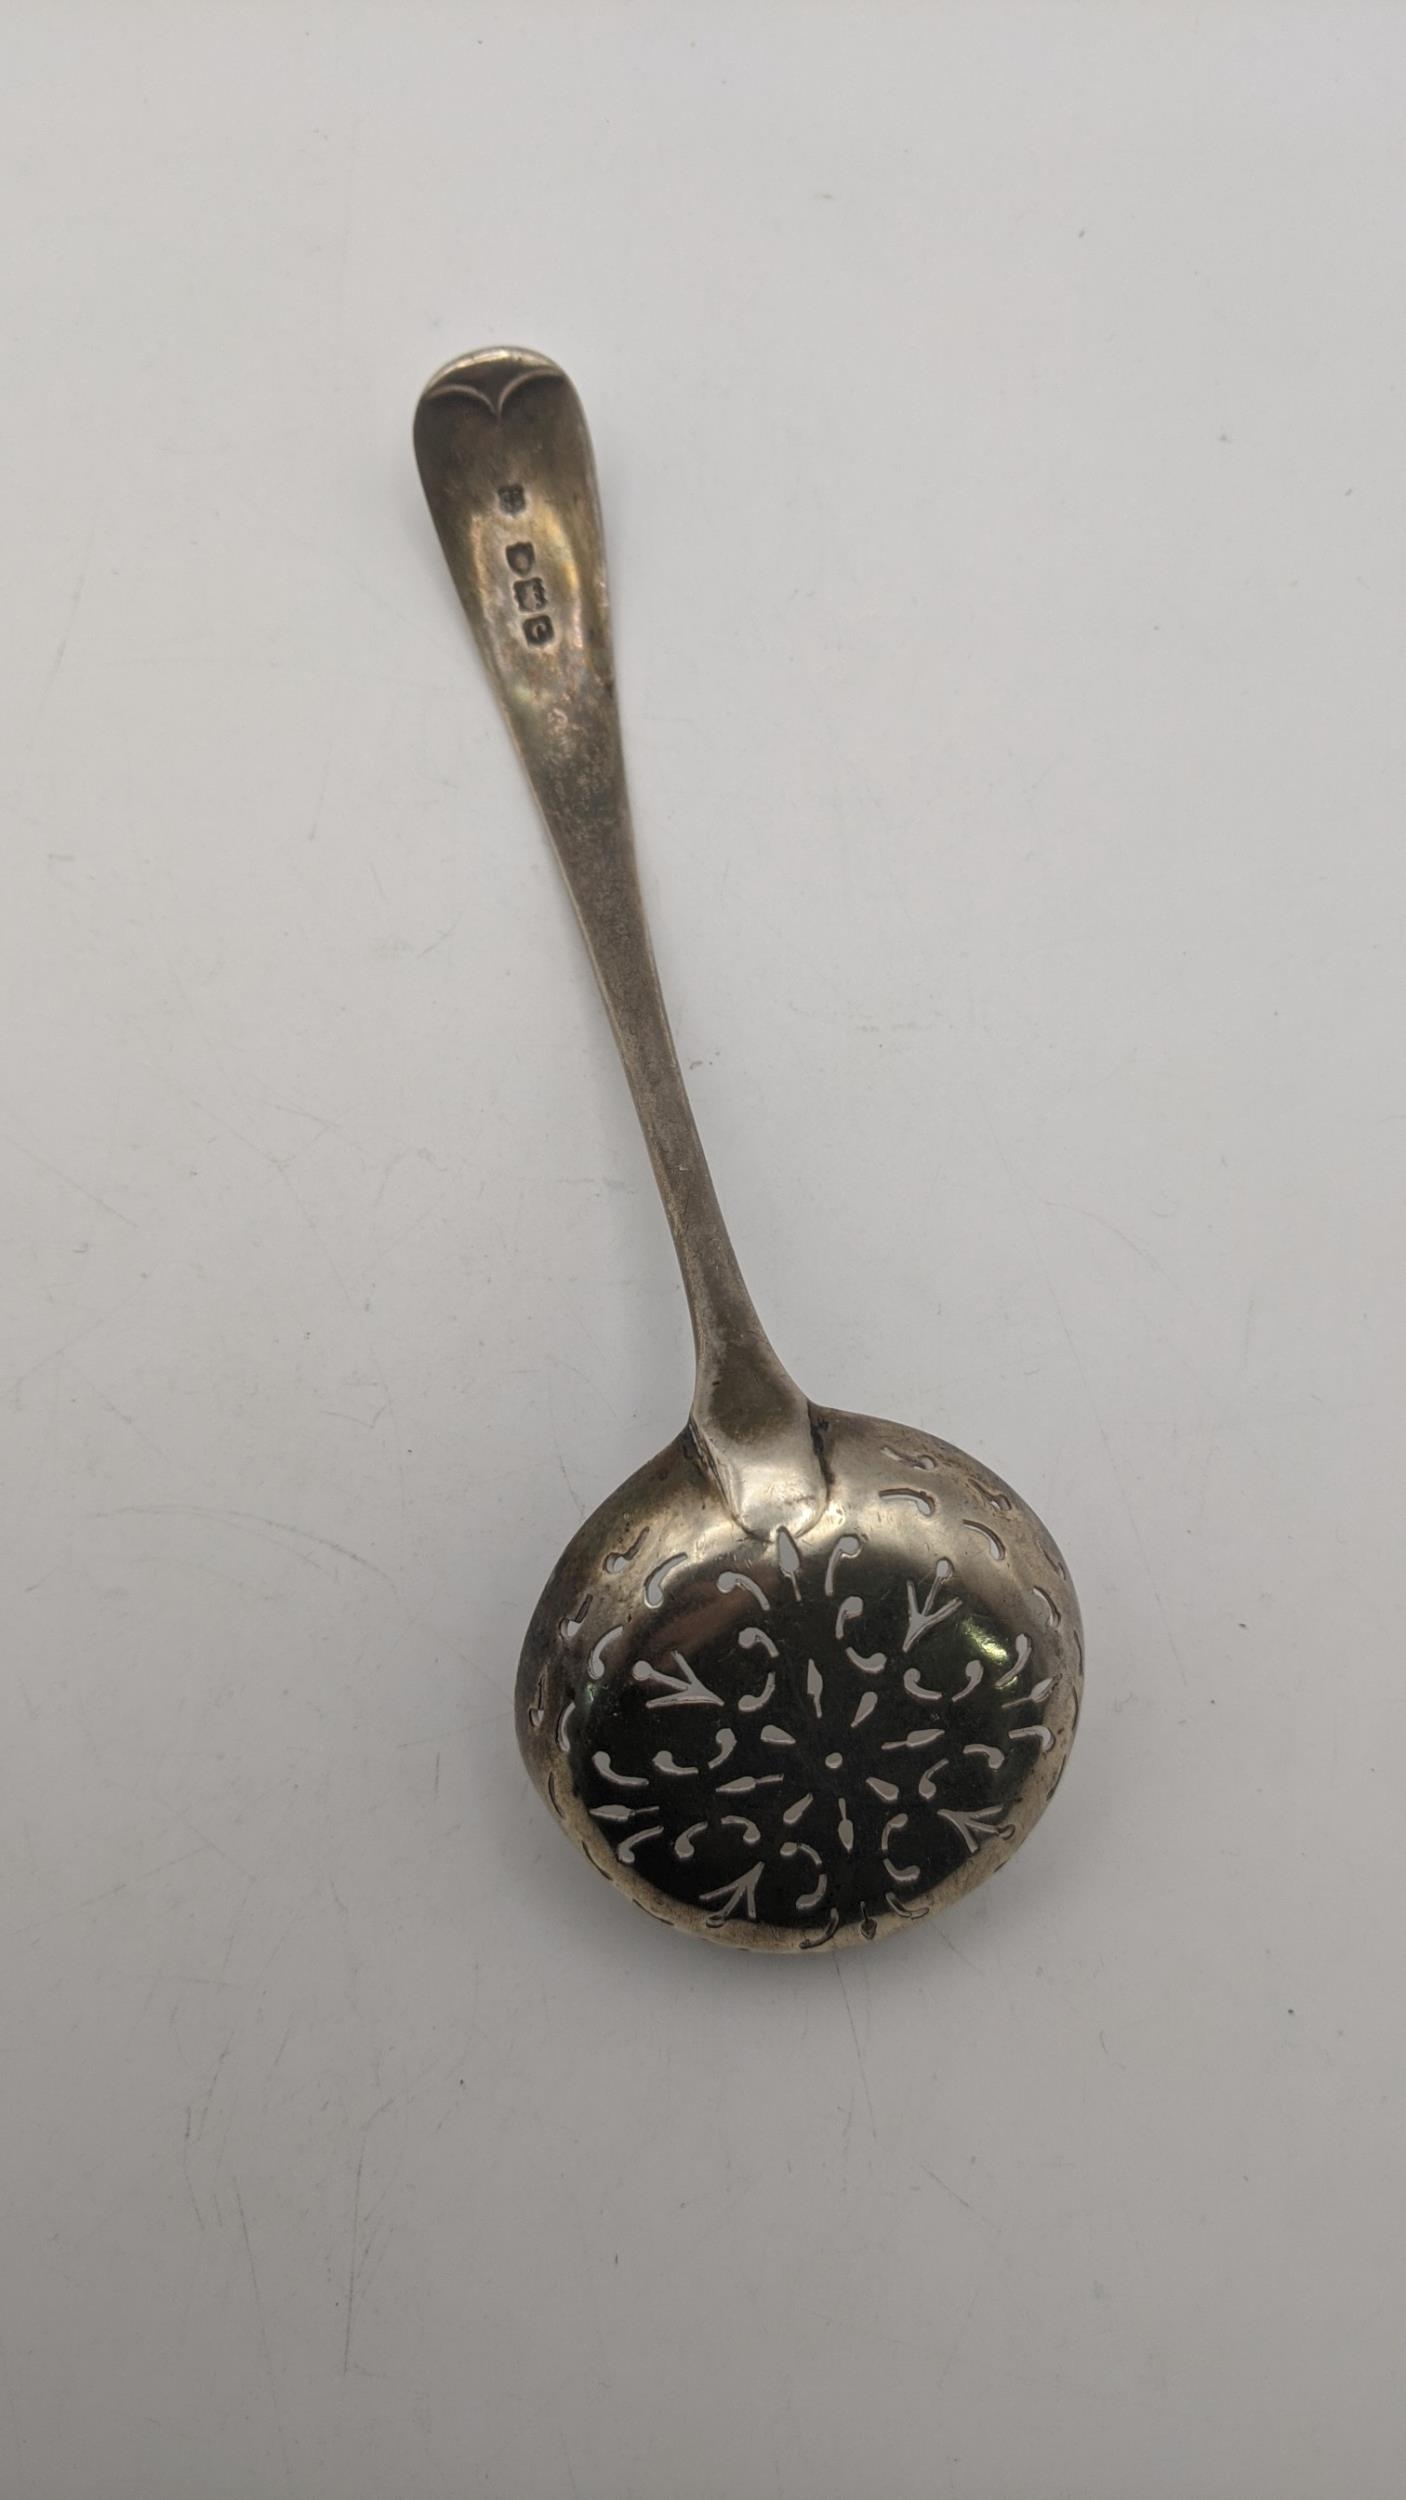 A silver sifter spoon with engraved and initiated ornament hallmarked London 1898, weight 50g - Image 2 of 3